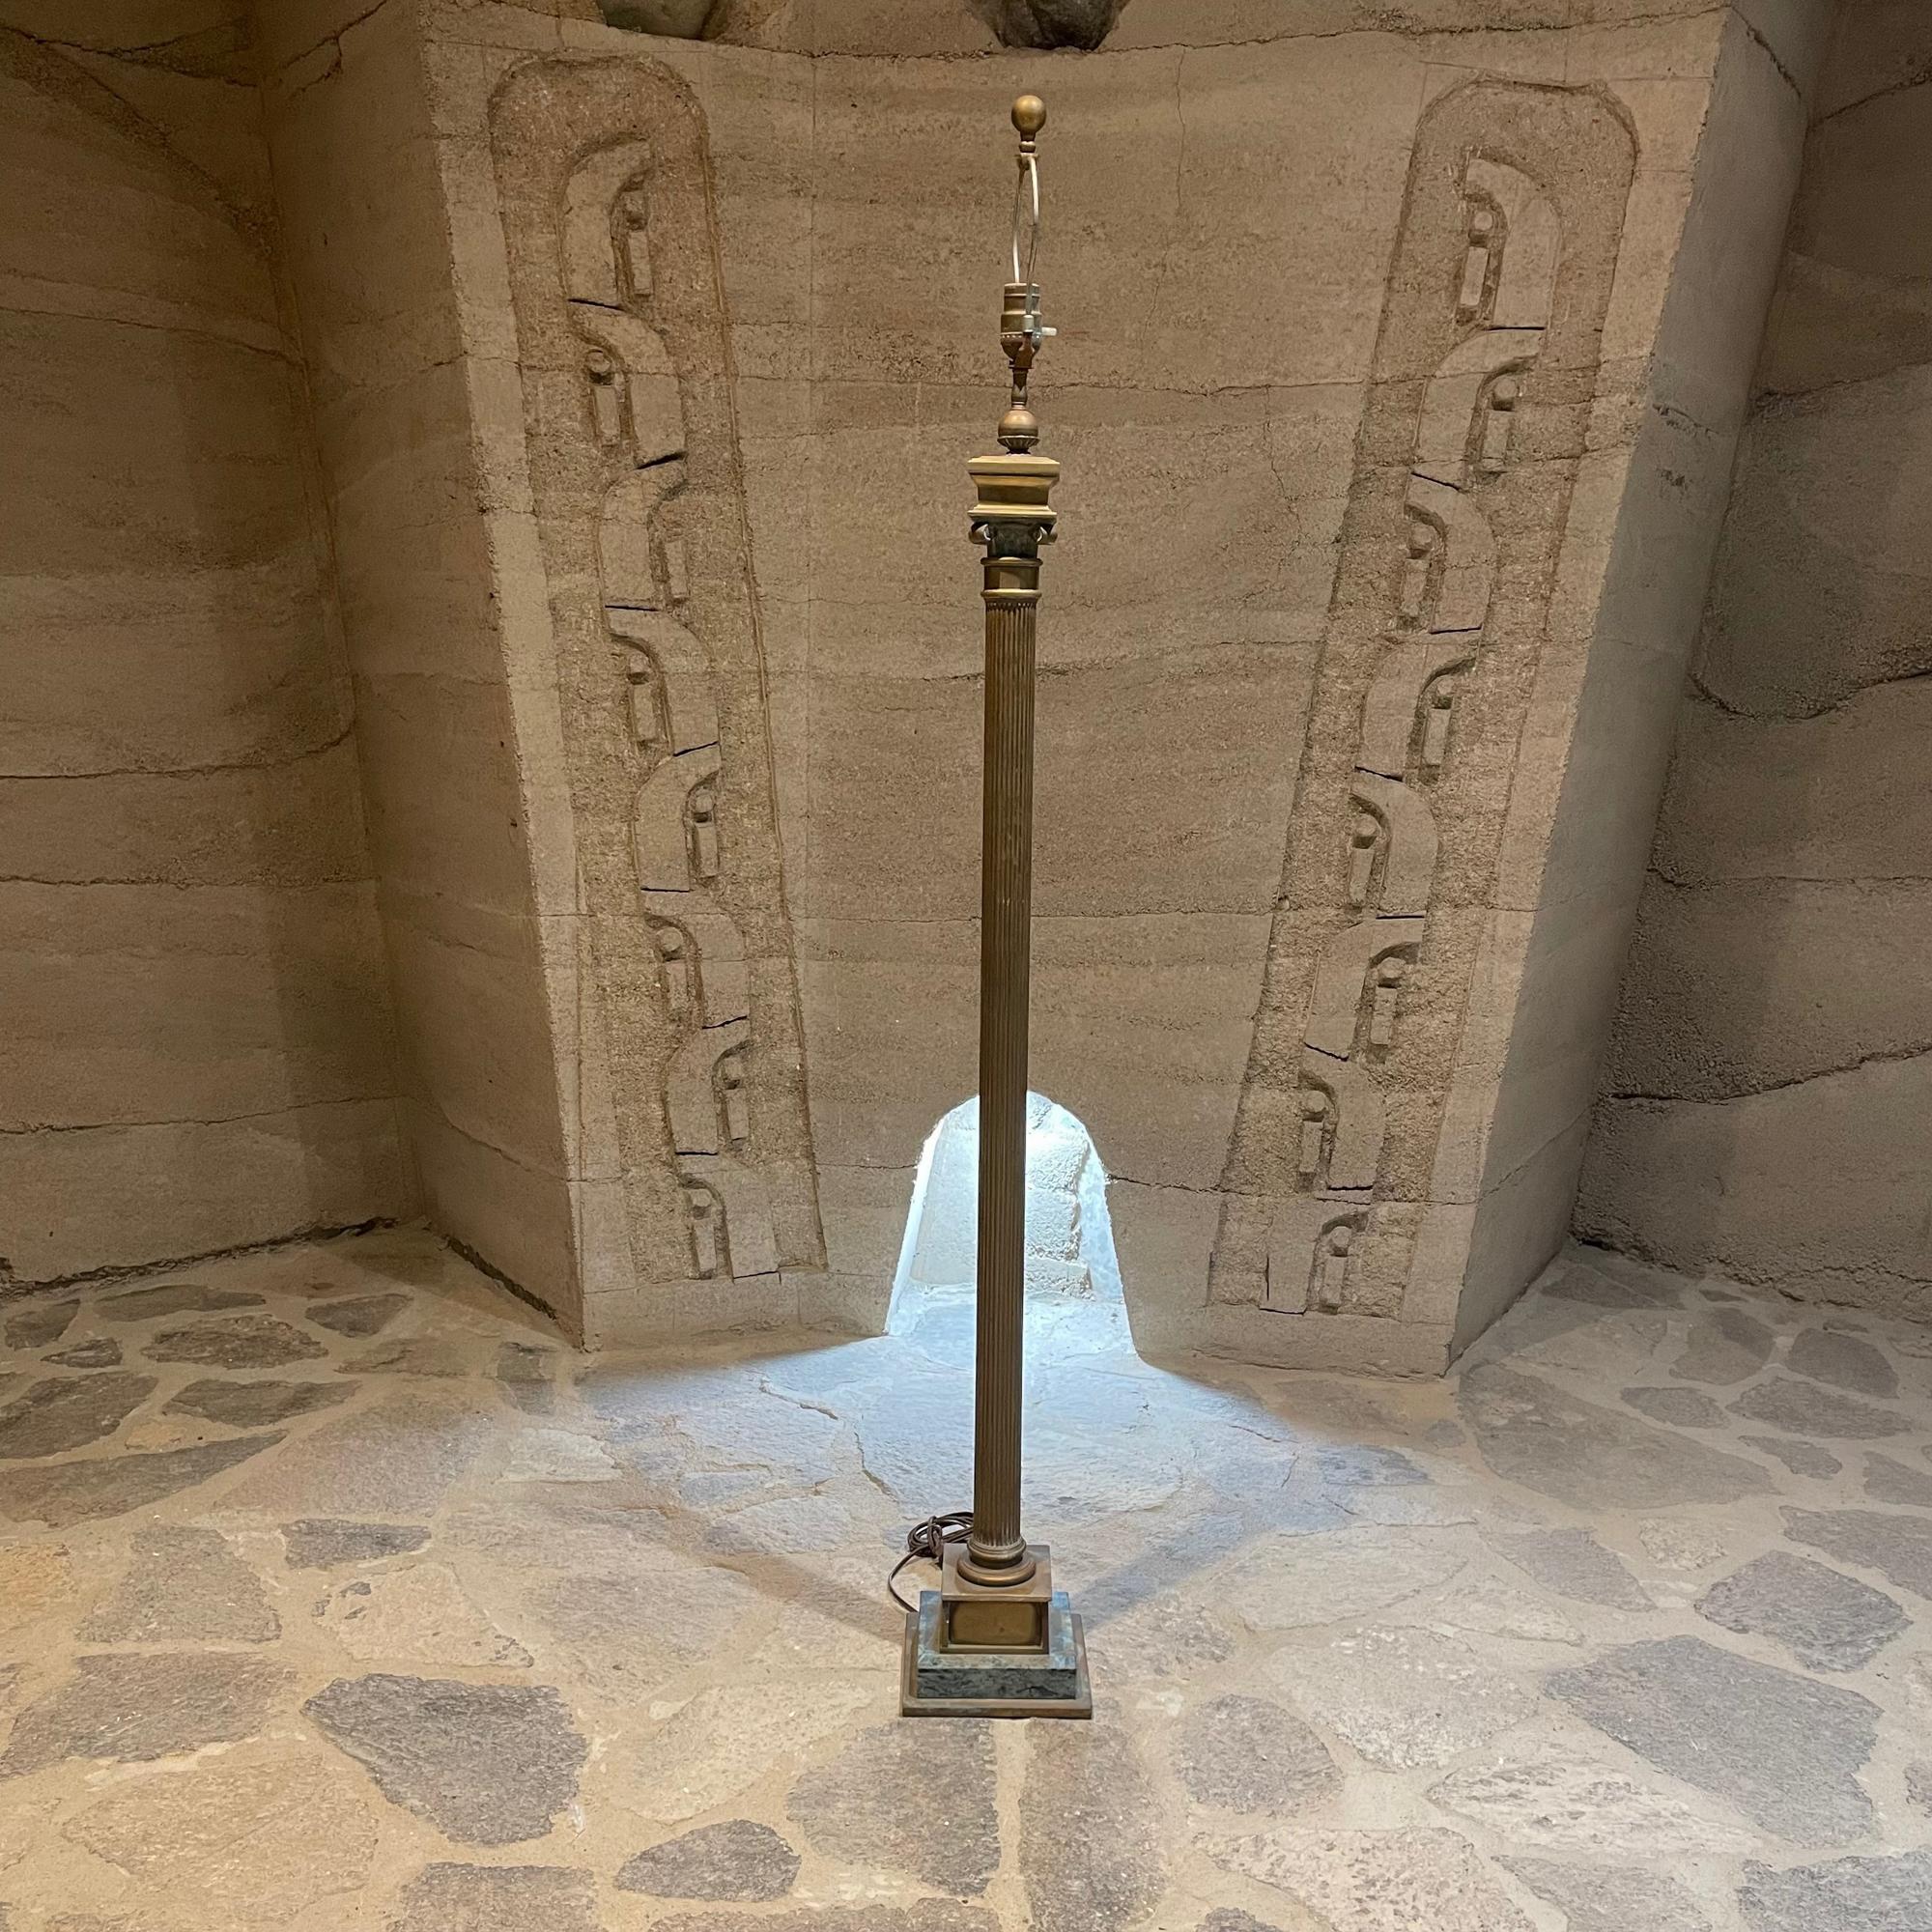 1950s Mexican Modernist neoclassical column floor lamp in patinated bronze and green marble with regal Roman detail 
Attributed to the design style of Arturo Pani. Unmarked.
Mexican neoclassical column floor lamp with regal Roman